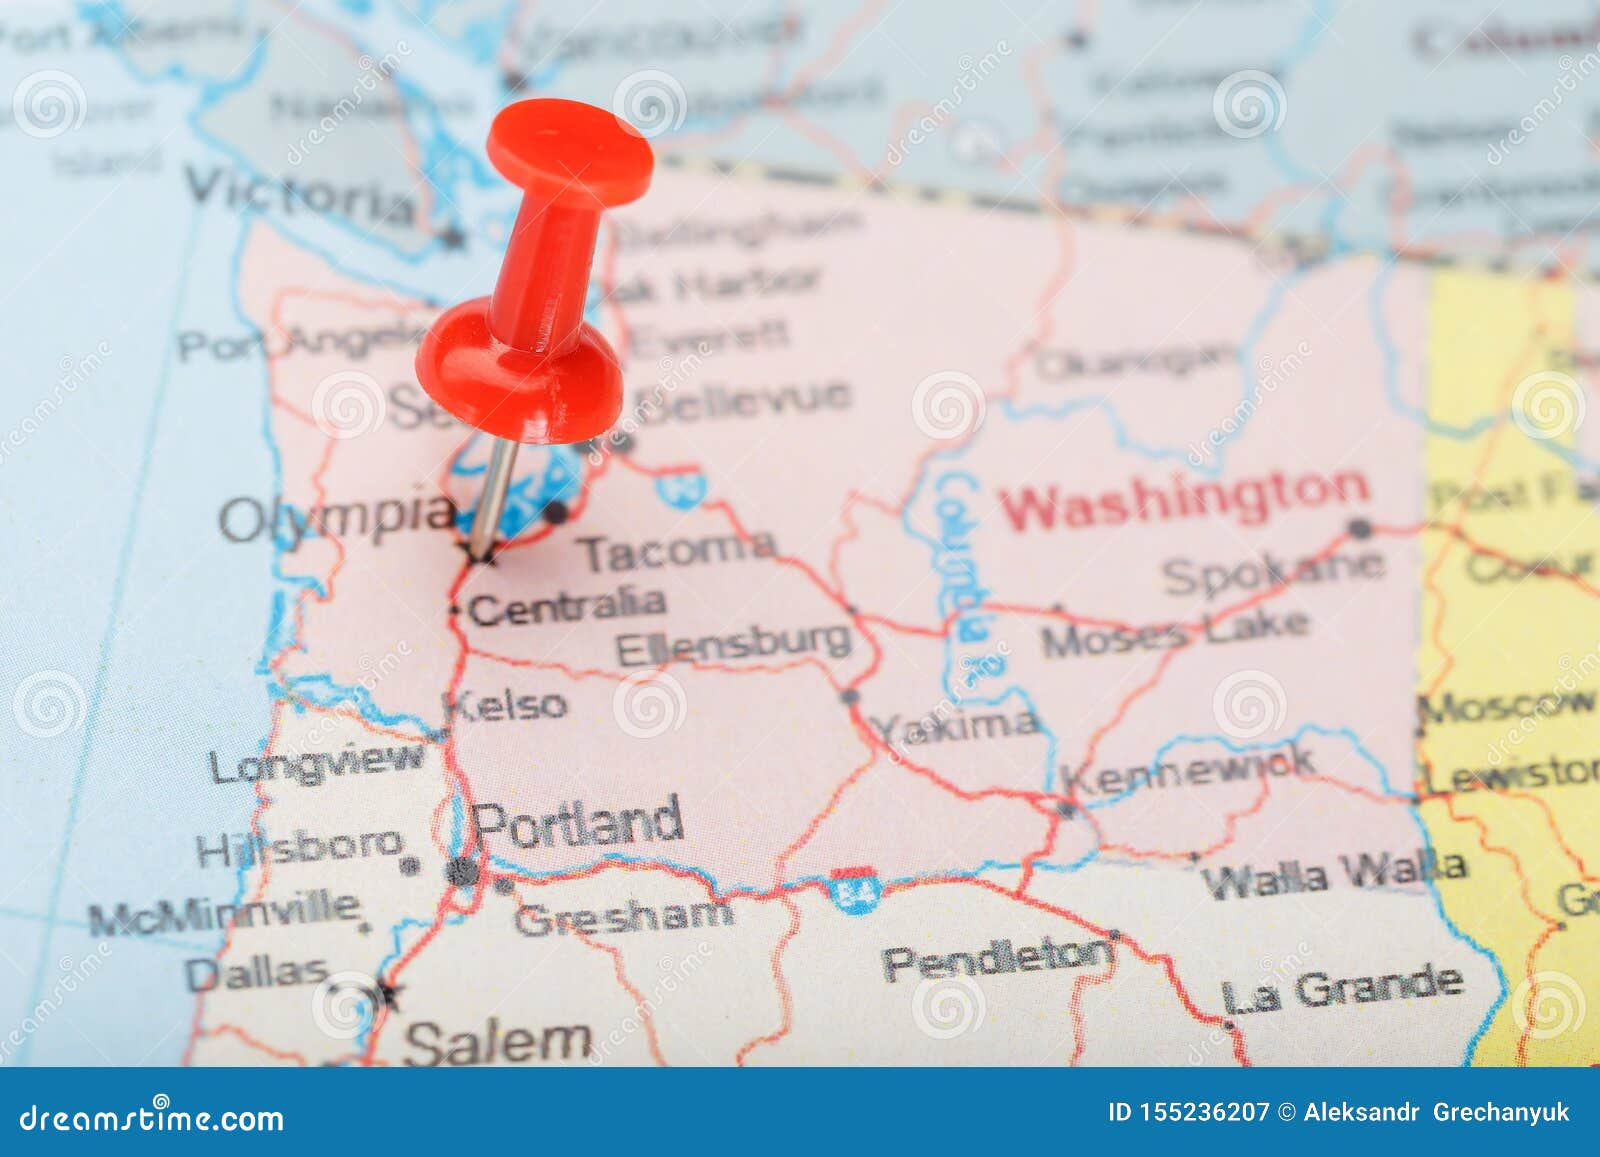 Red Clerical Needle On Map Of Usa Washington And Dc Close Up Map